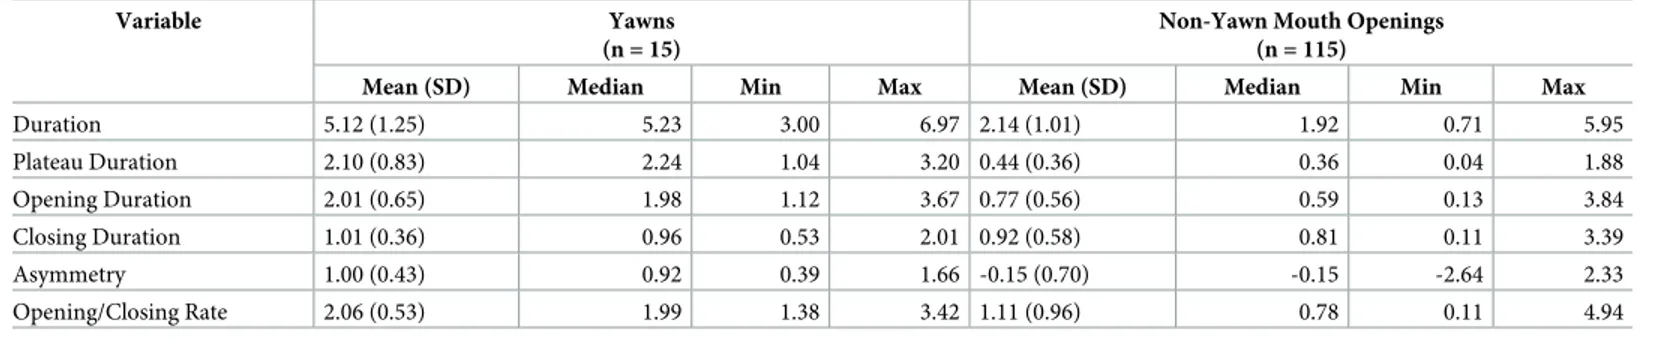 Table 3. Variables related to temporal dynamics of yawns and non-yawn mouth openings.